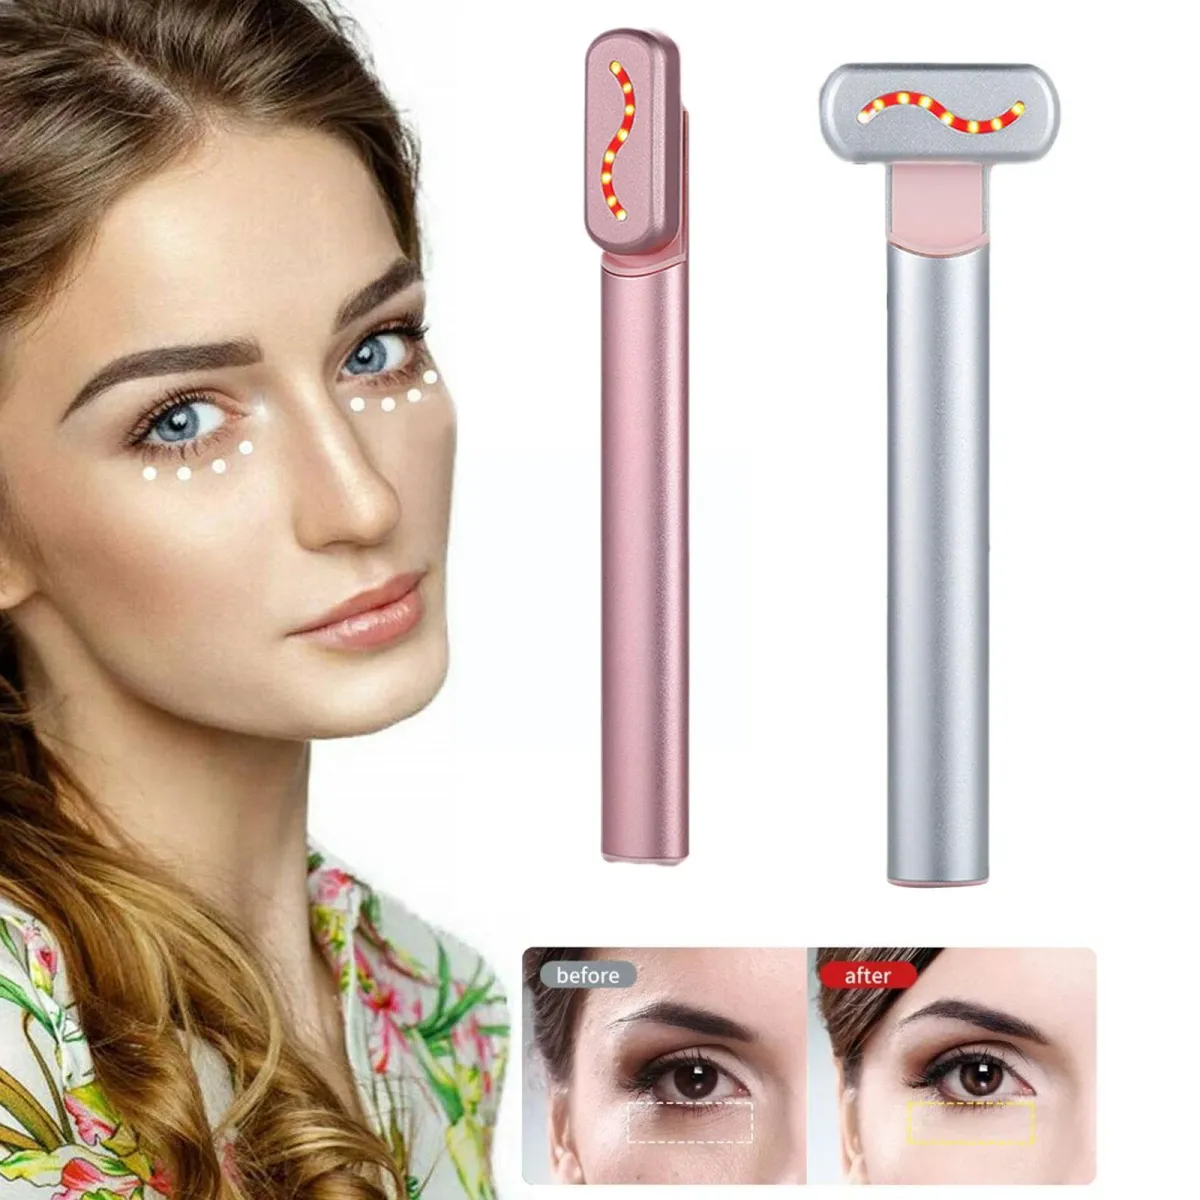 Introducing the Light Therapy Wand: A Revolutionary Treatment for Skin Issues